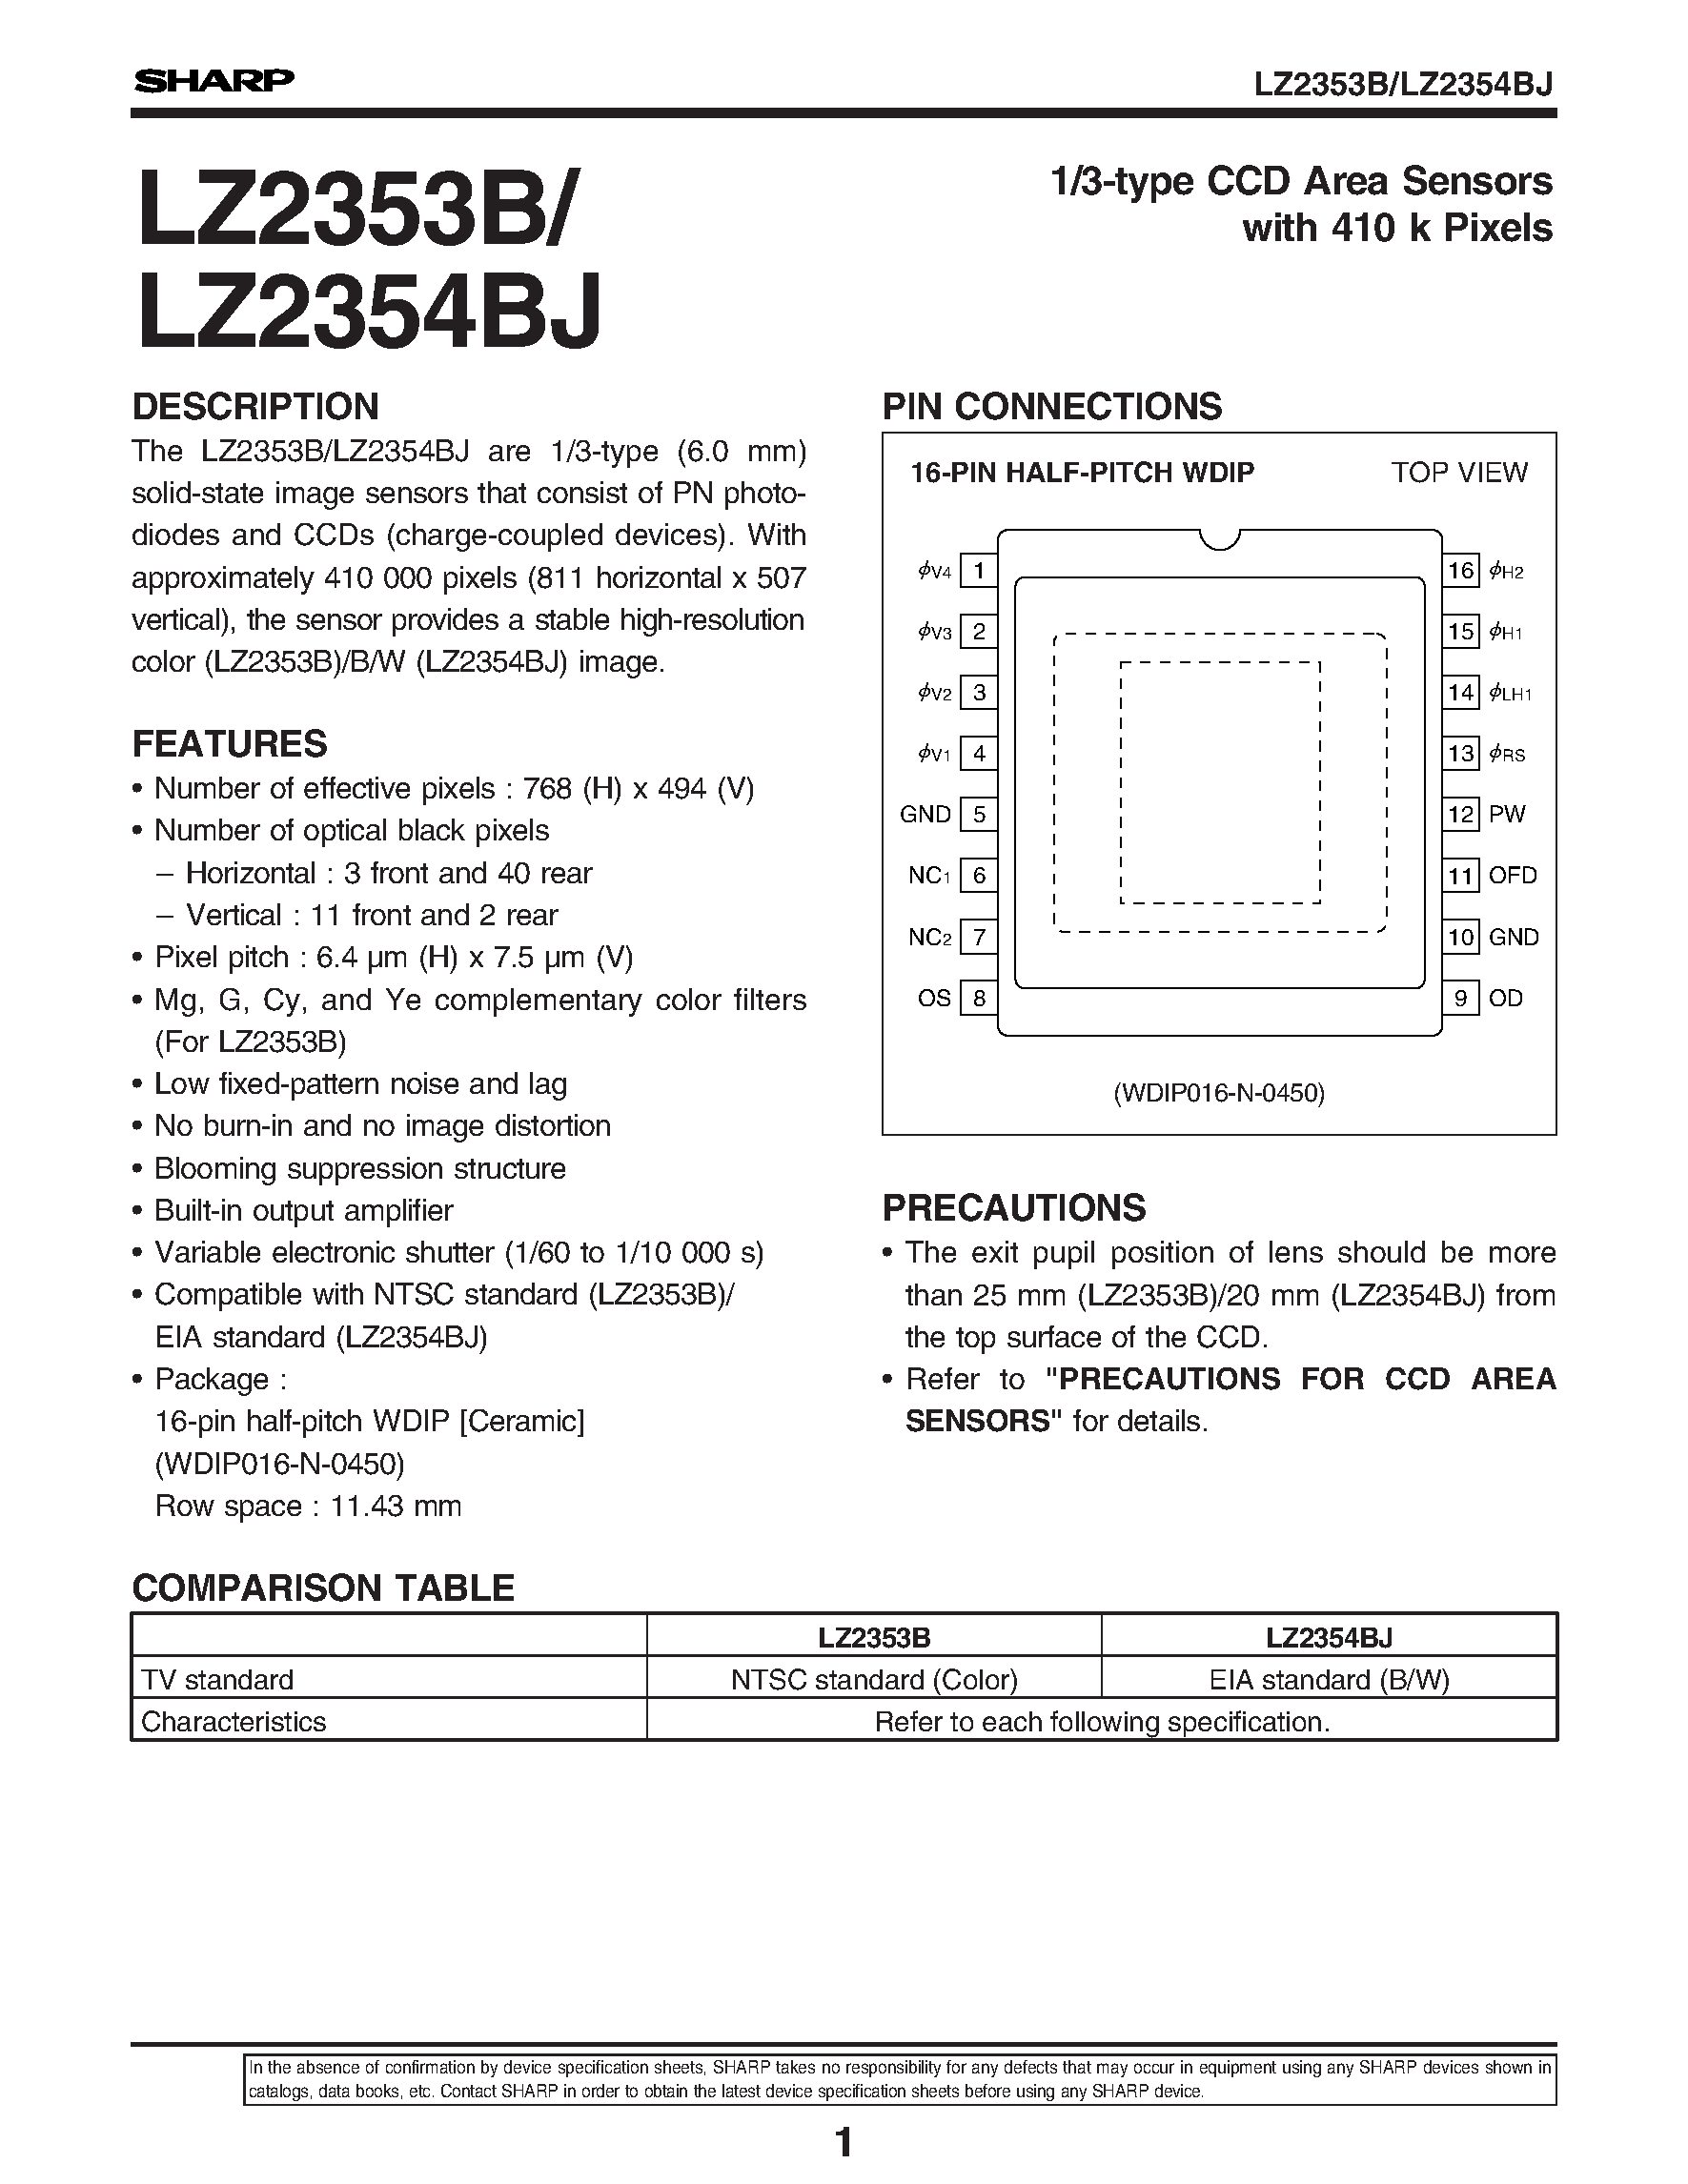 Datasheet LZ2353 - 1/3-type CCD Area Sensors with 410 k Pixels page 1